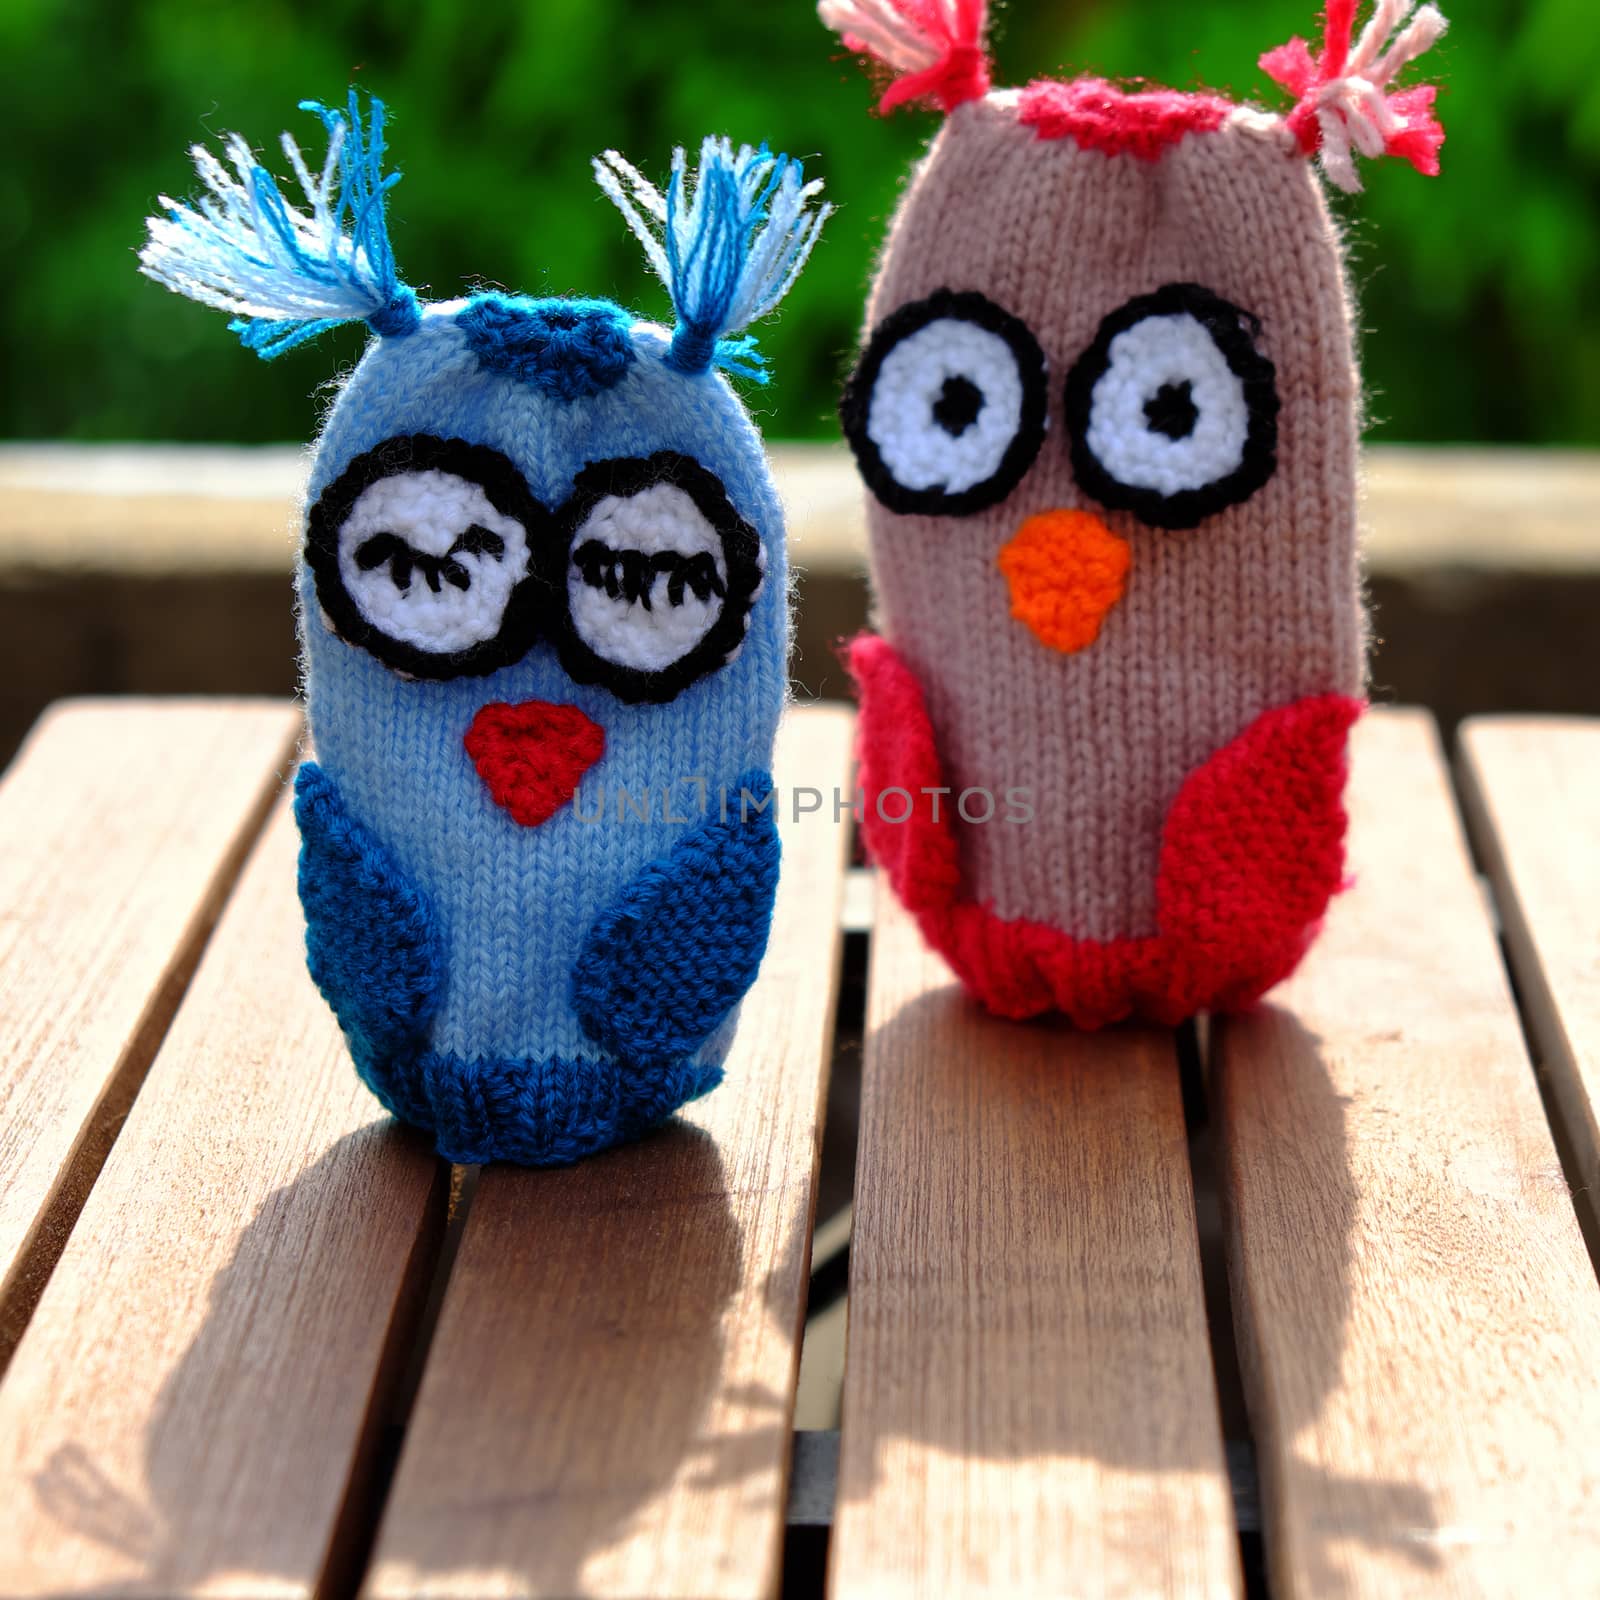 diy toy, knit owl puppet by xuanhuongho